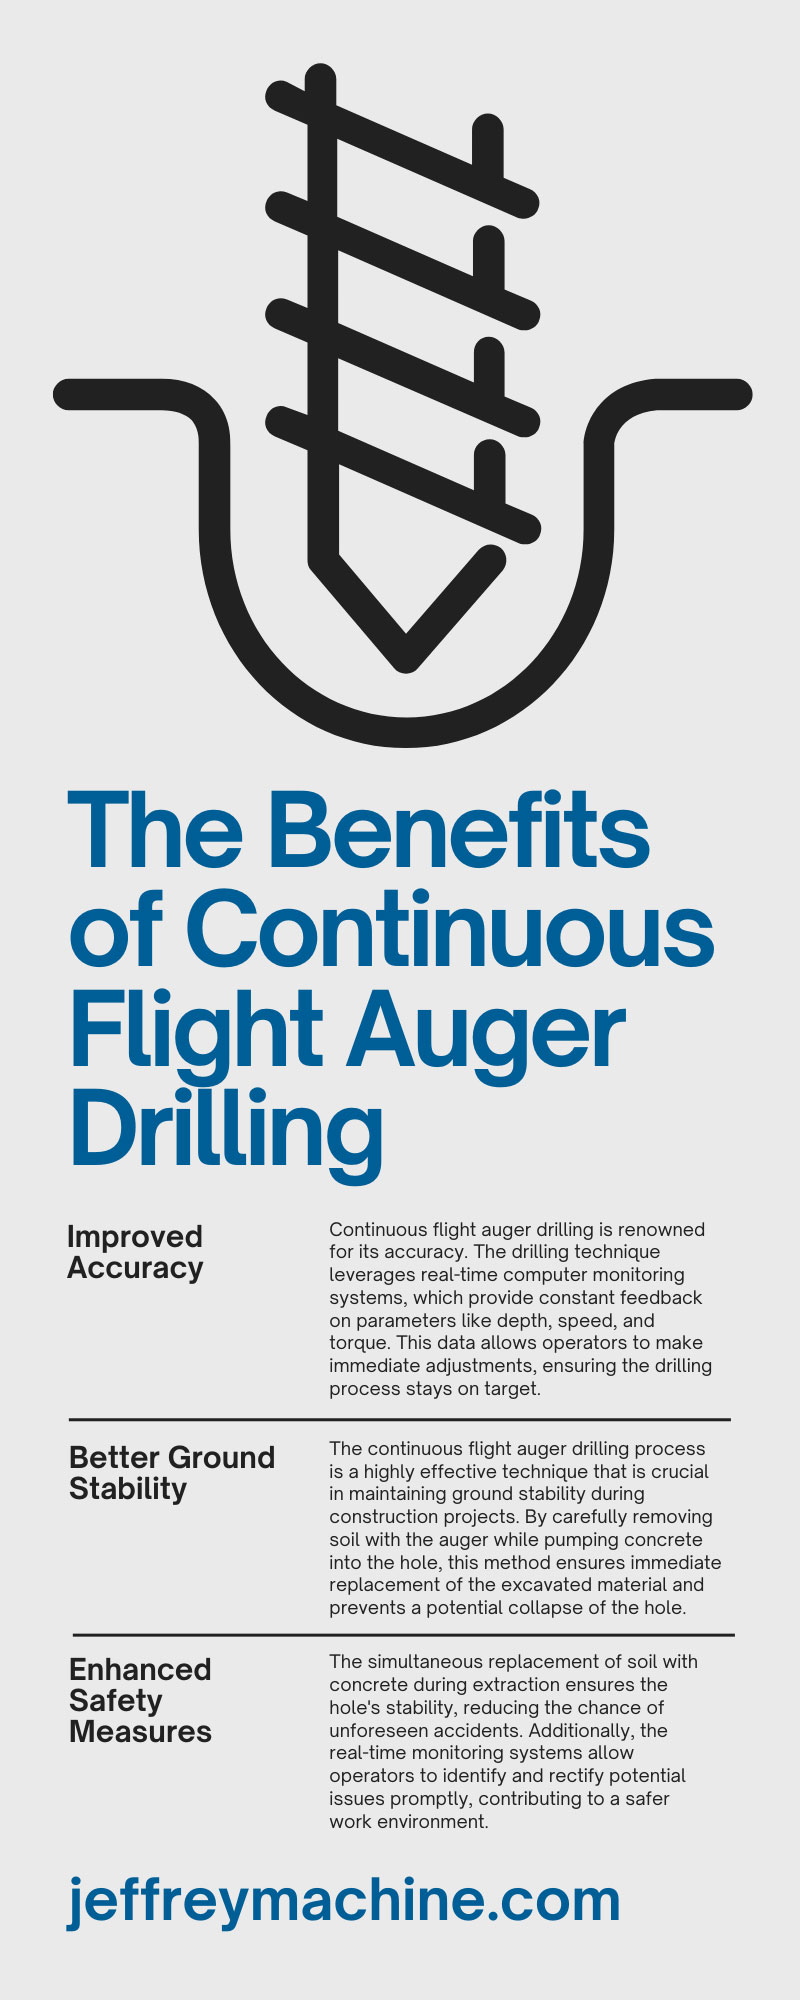 The Benefits of Continuous Flight Auger Drilling